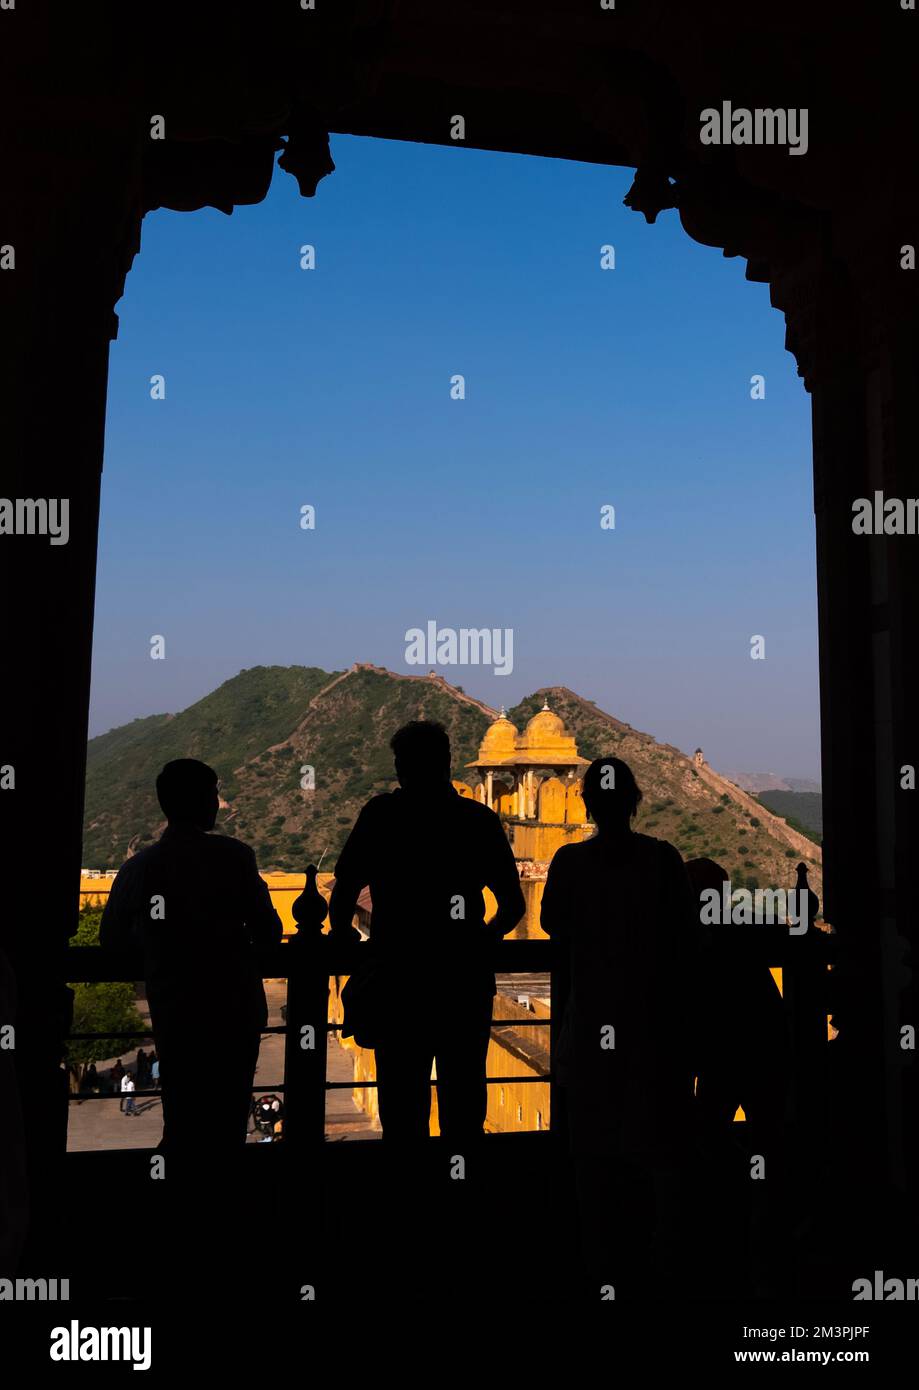 Tourists silhouettes in Amber Fort, Rajasthan, Amer, India Stock Photo